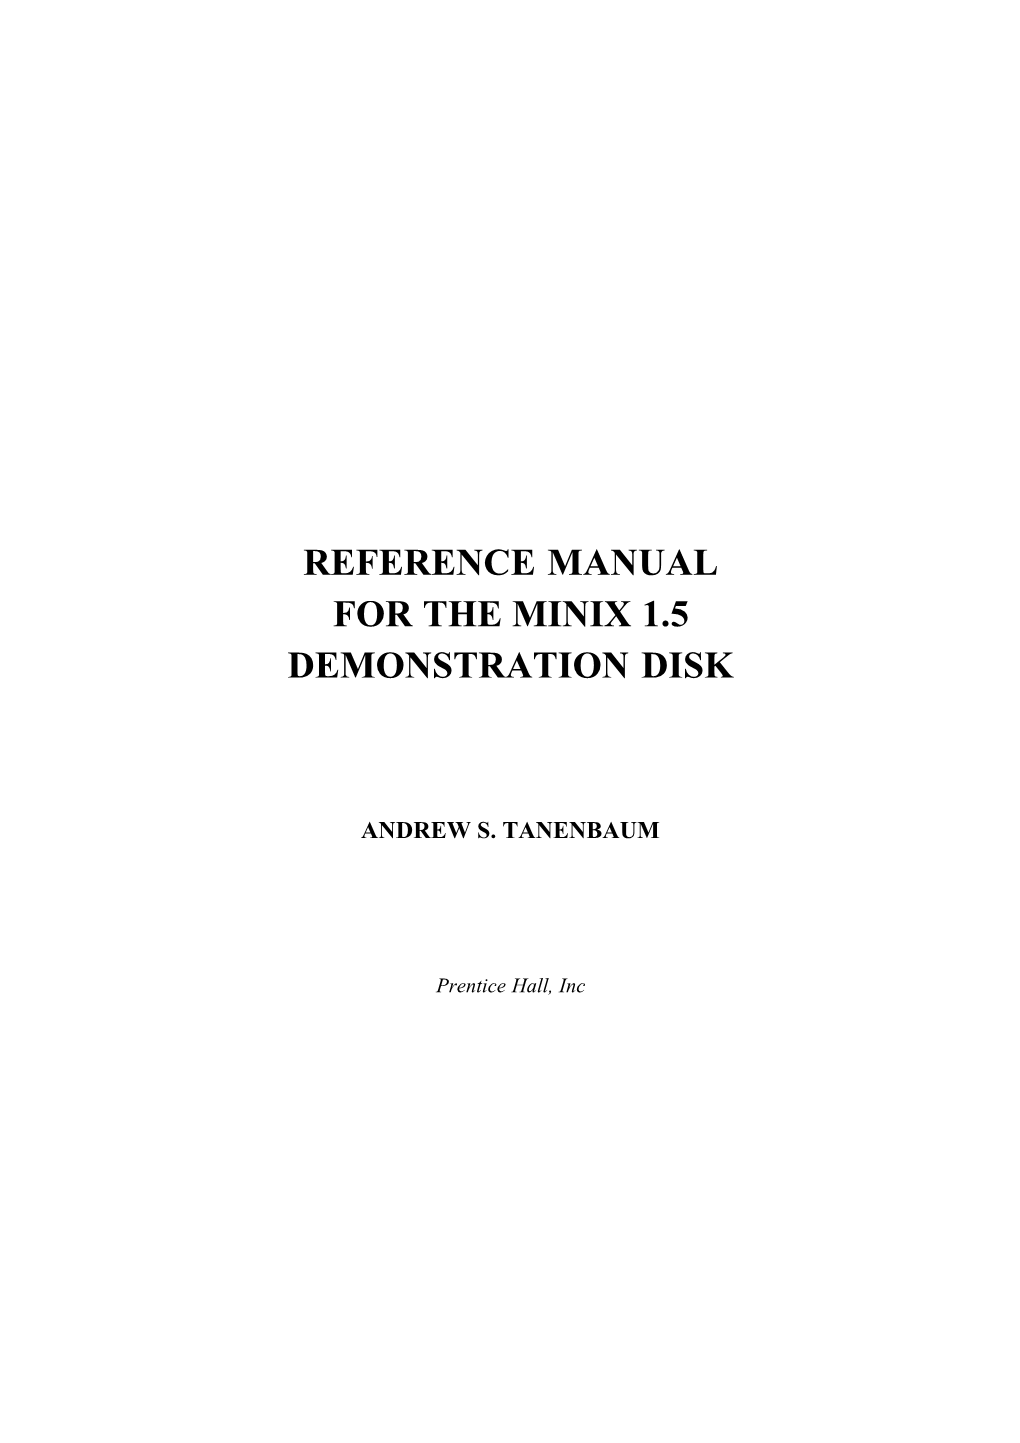 Reference Manual for the Minix 1.5 Demonstration Disk